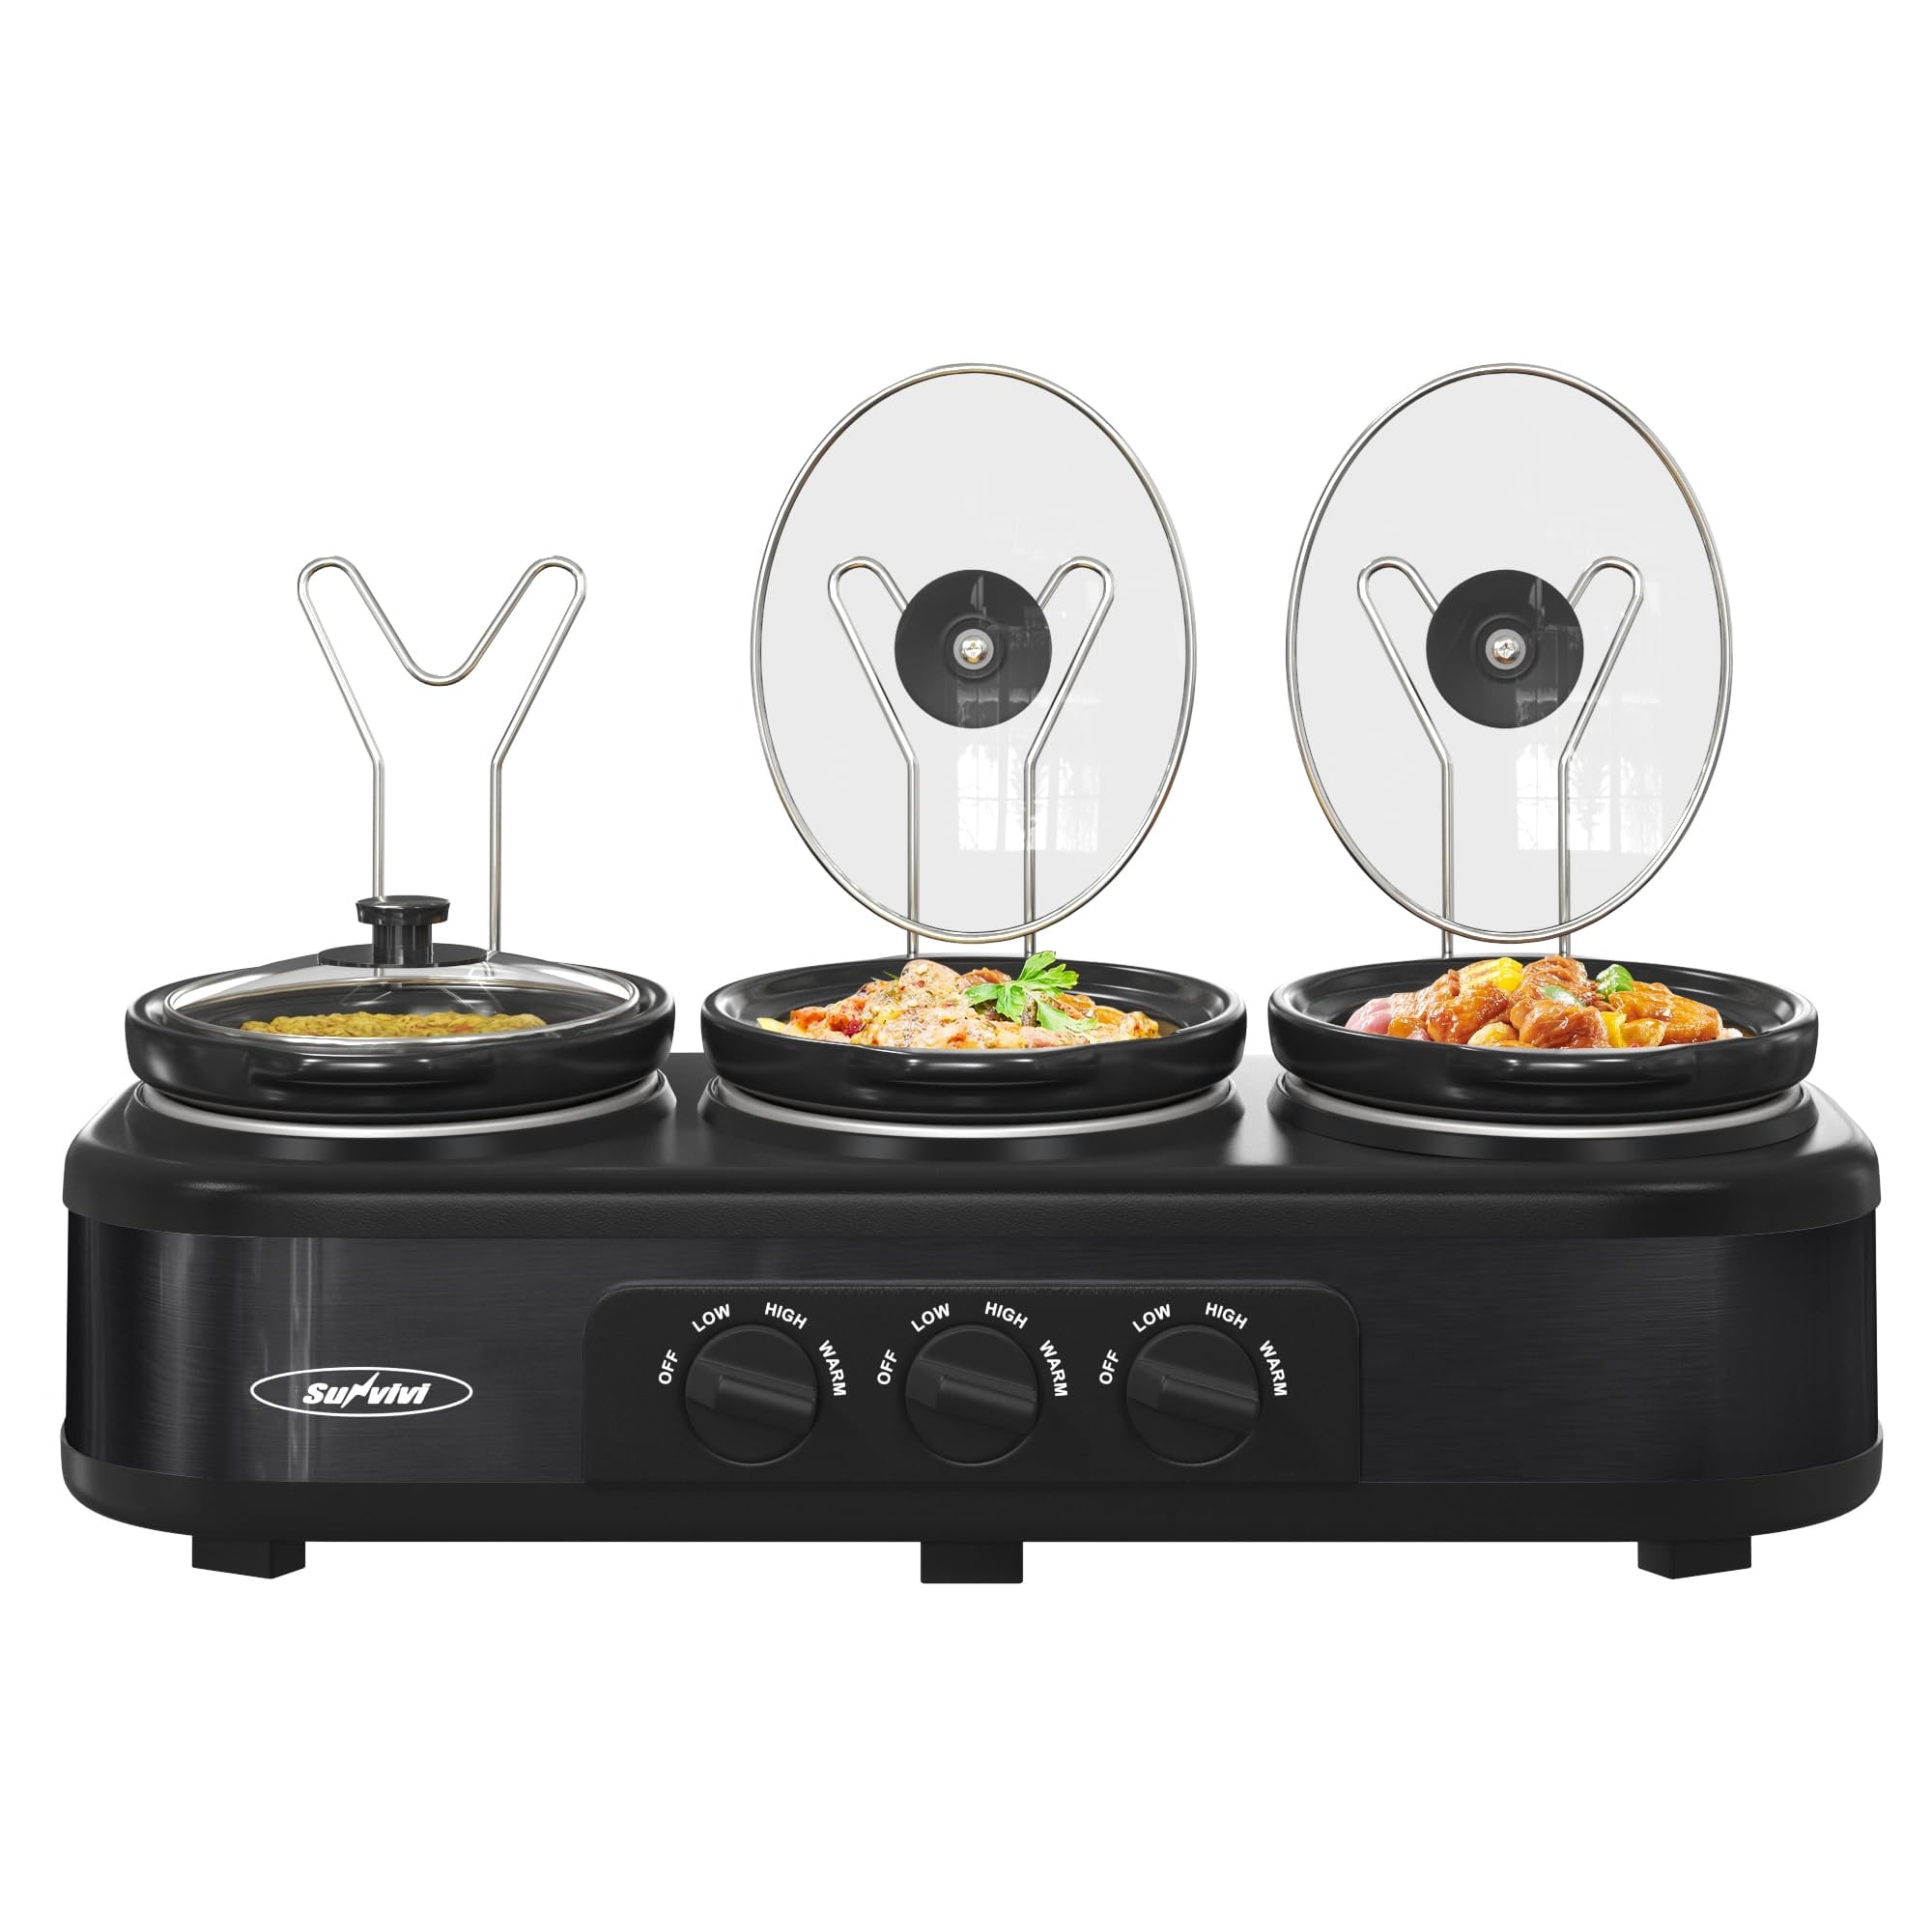 Triple Slow Cooker Buffet Servers and Warmer,3 Pot Food Mini Manual Slow  Cooker with Adjustable Temp, Lid Rests, Ceramic Pot - Bed Bath & Beyond -  39589293